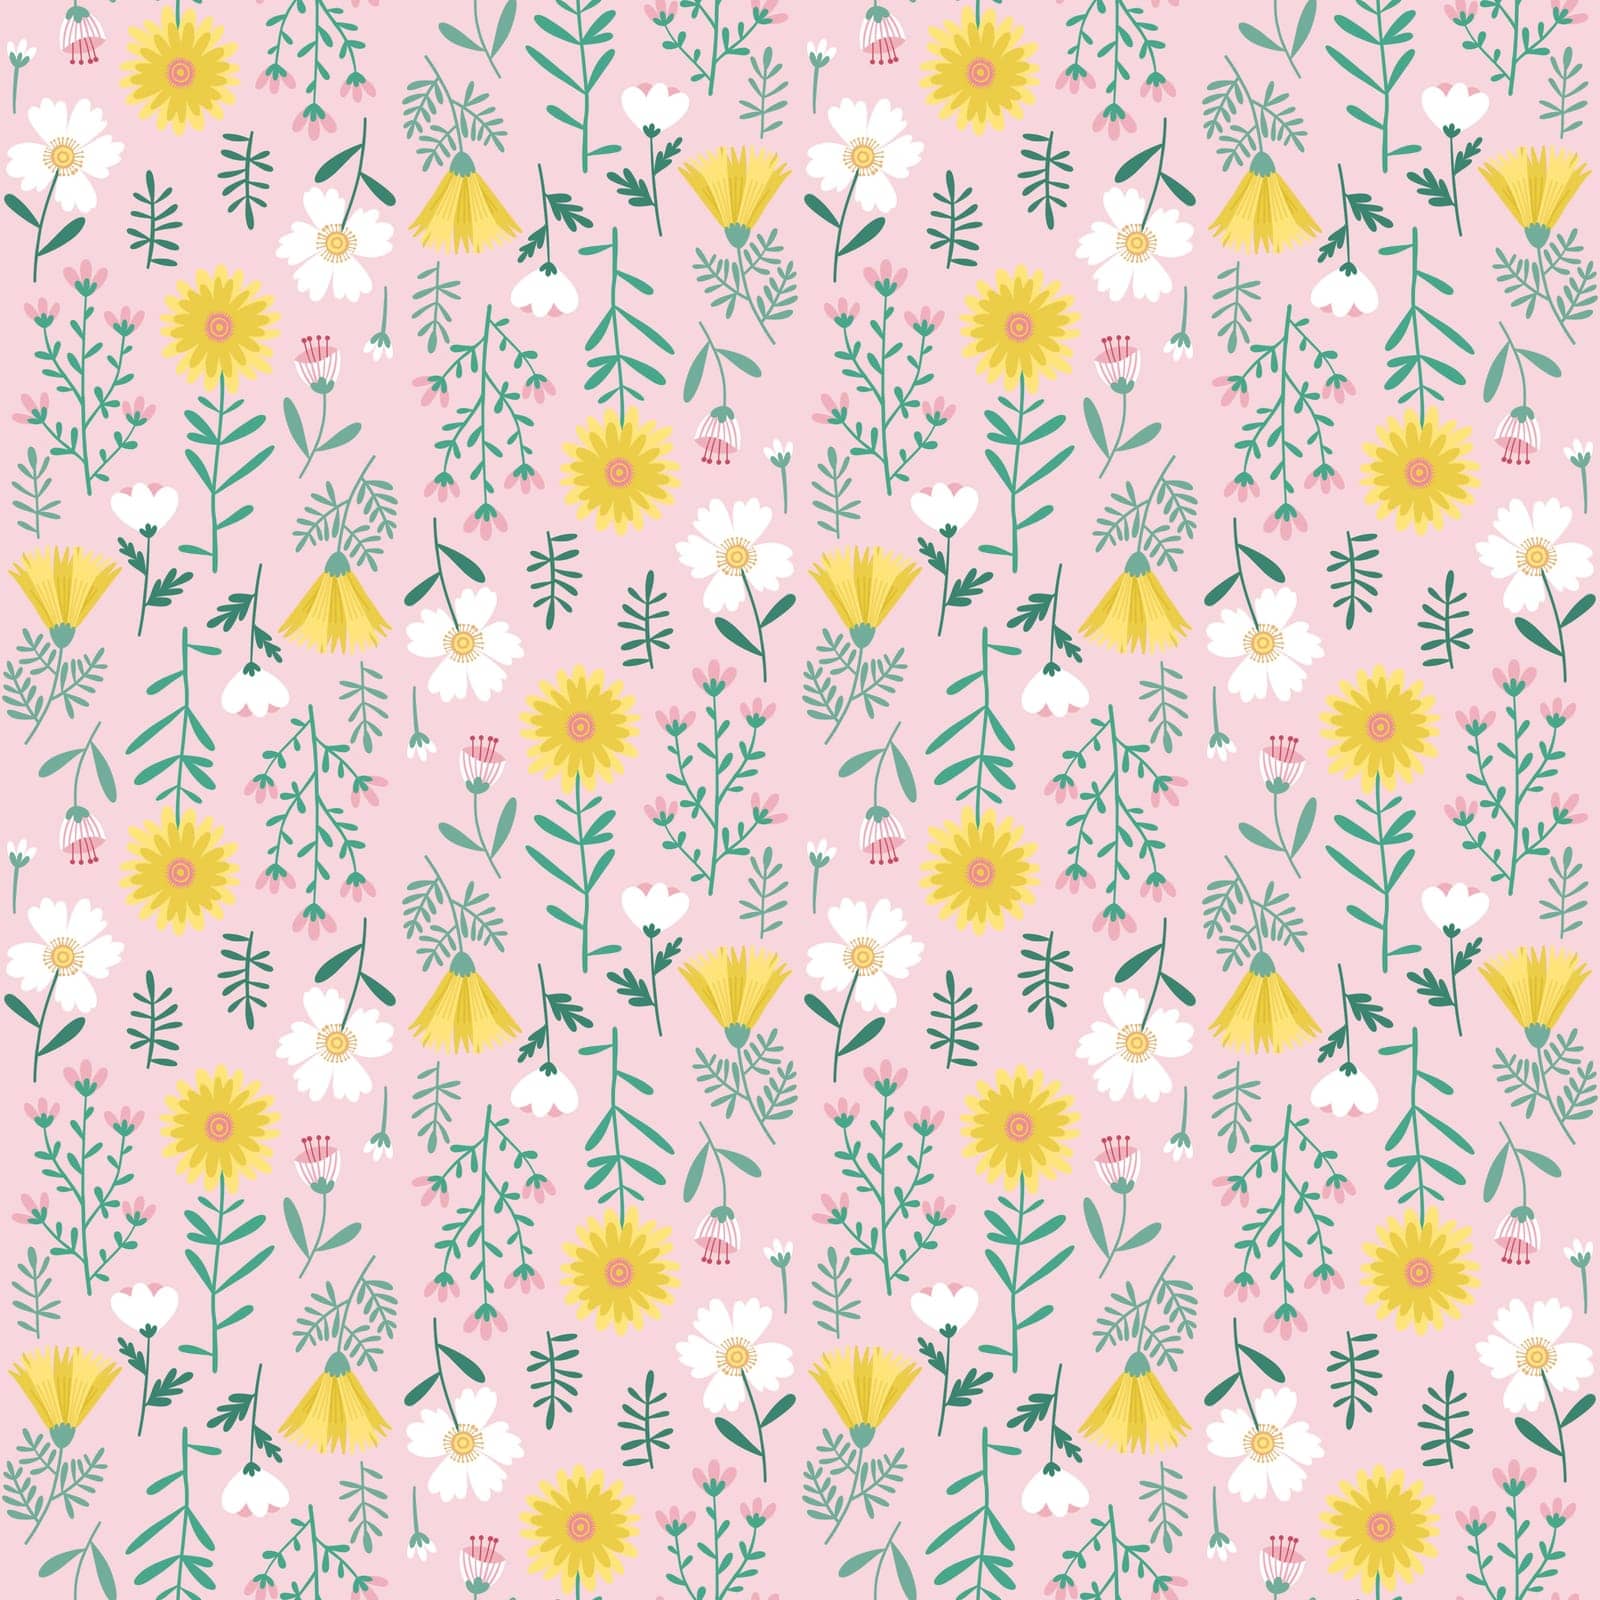 Floral Seamless Pattern of White, Pink, Yellow Flowers on Light Pink Backdrop. Wallpaper Design for Textiles, Fabrics, Decorations, Papers Prints, Fashion Backgrounds, Wrappings Packaging.